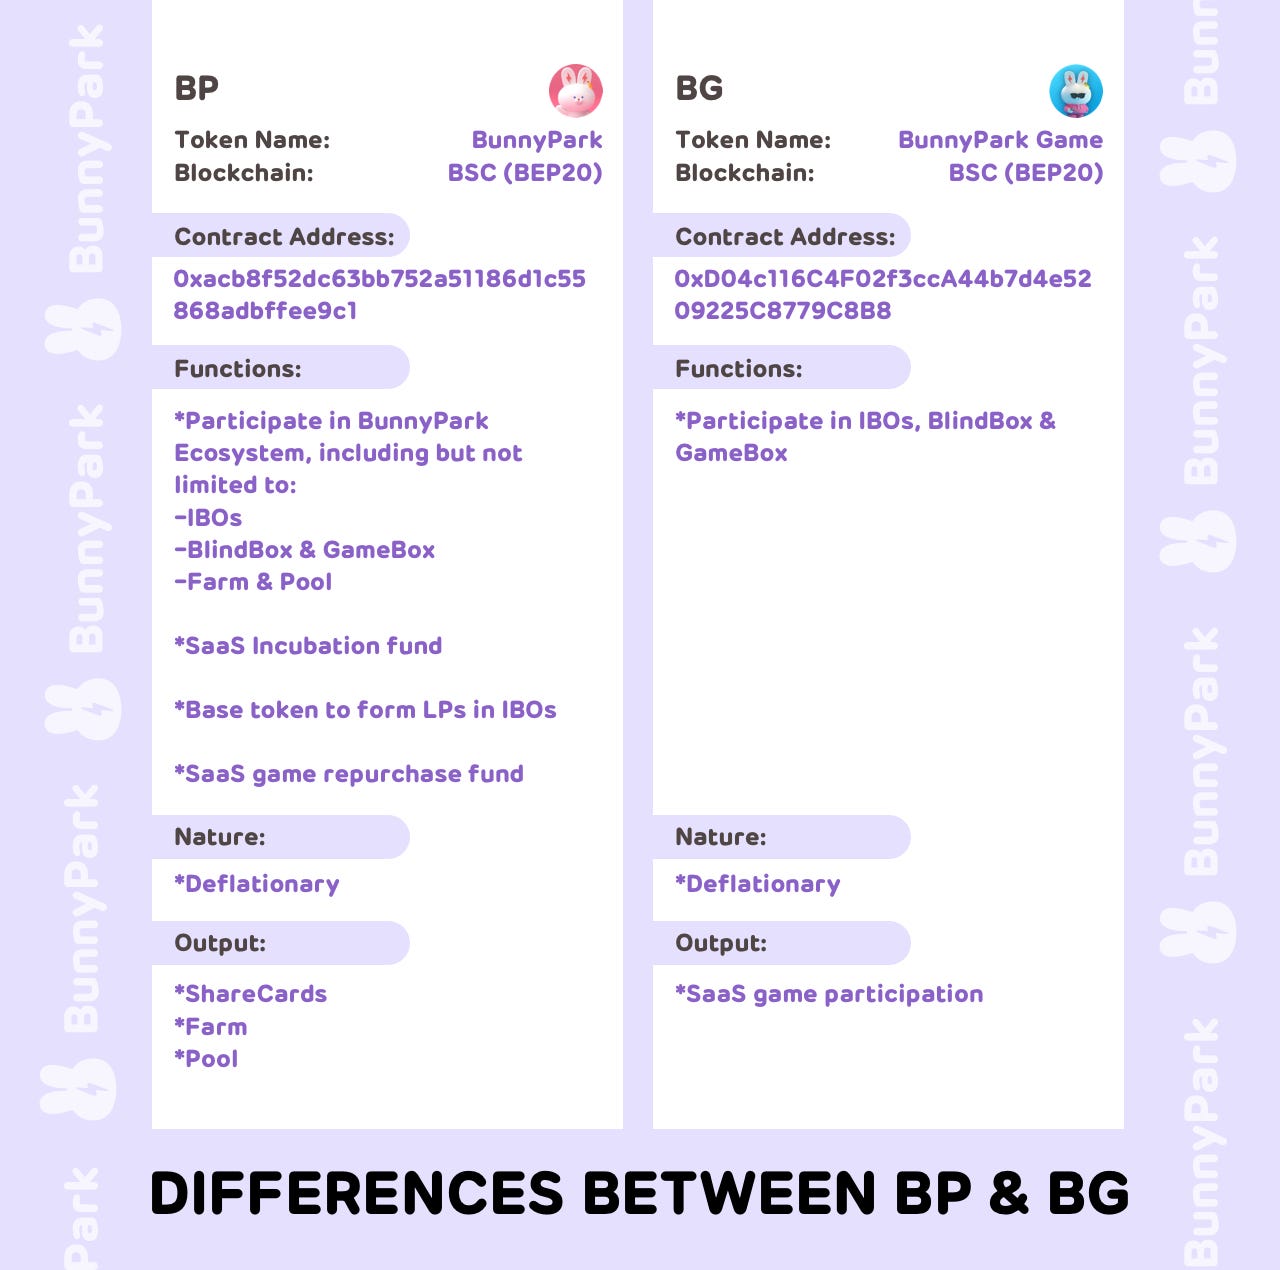 The differences between $BP & $BG in BunnyPark ecosystem